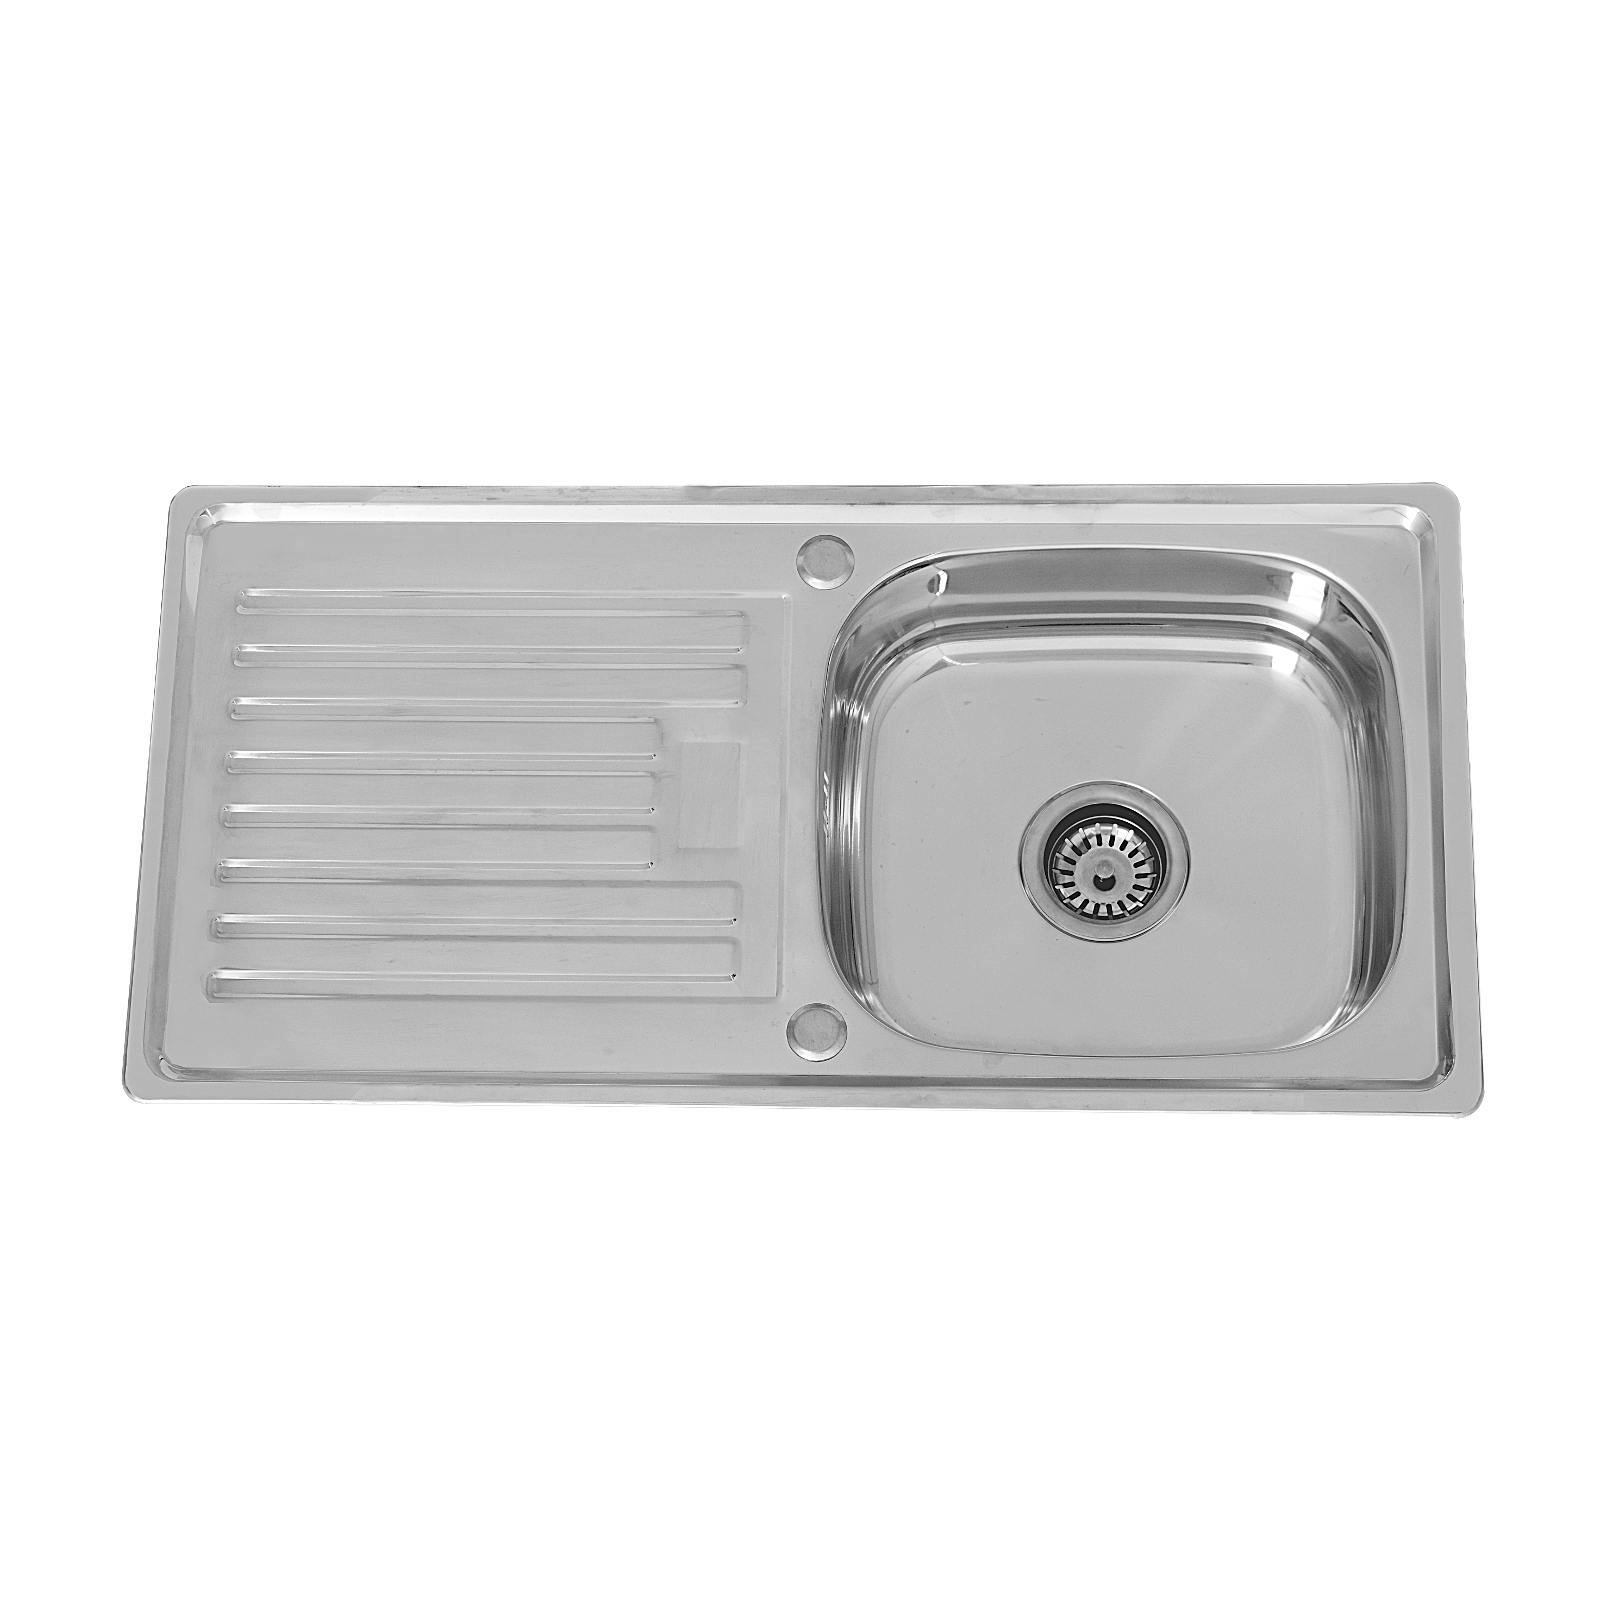 https://visualhunt.com/photos/11/stainless-steel-double-sink-with-drainboard-stainless.jpg